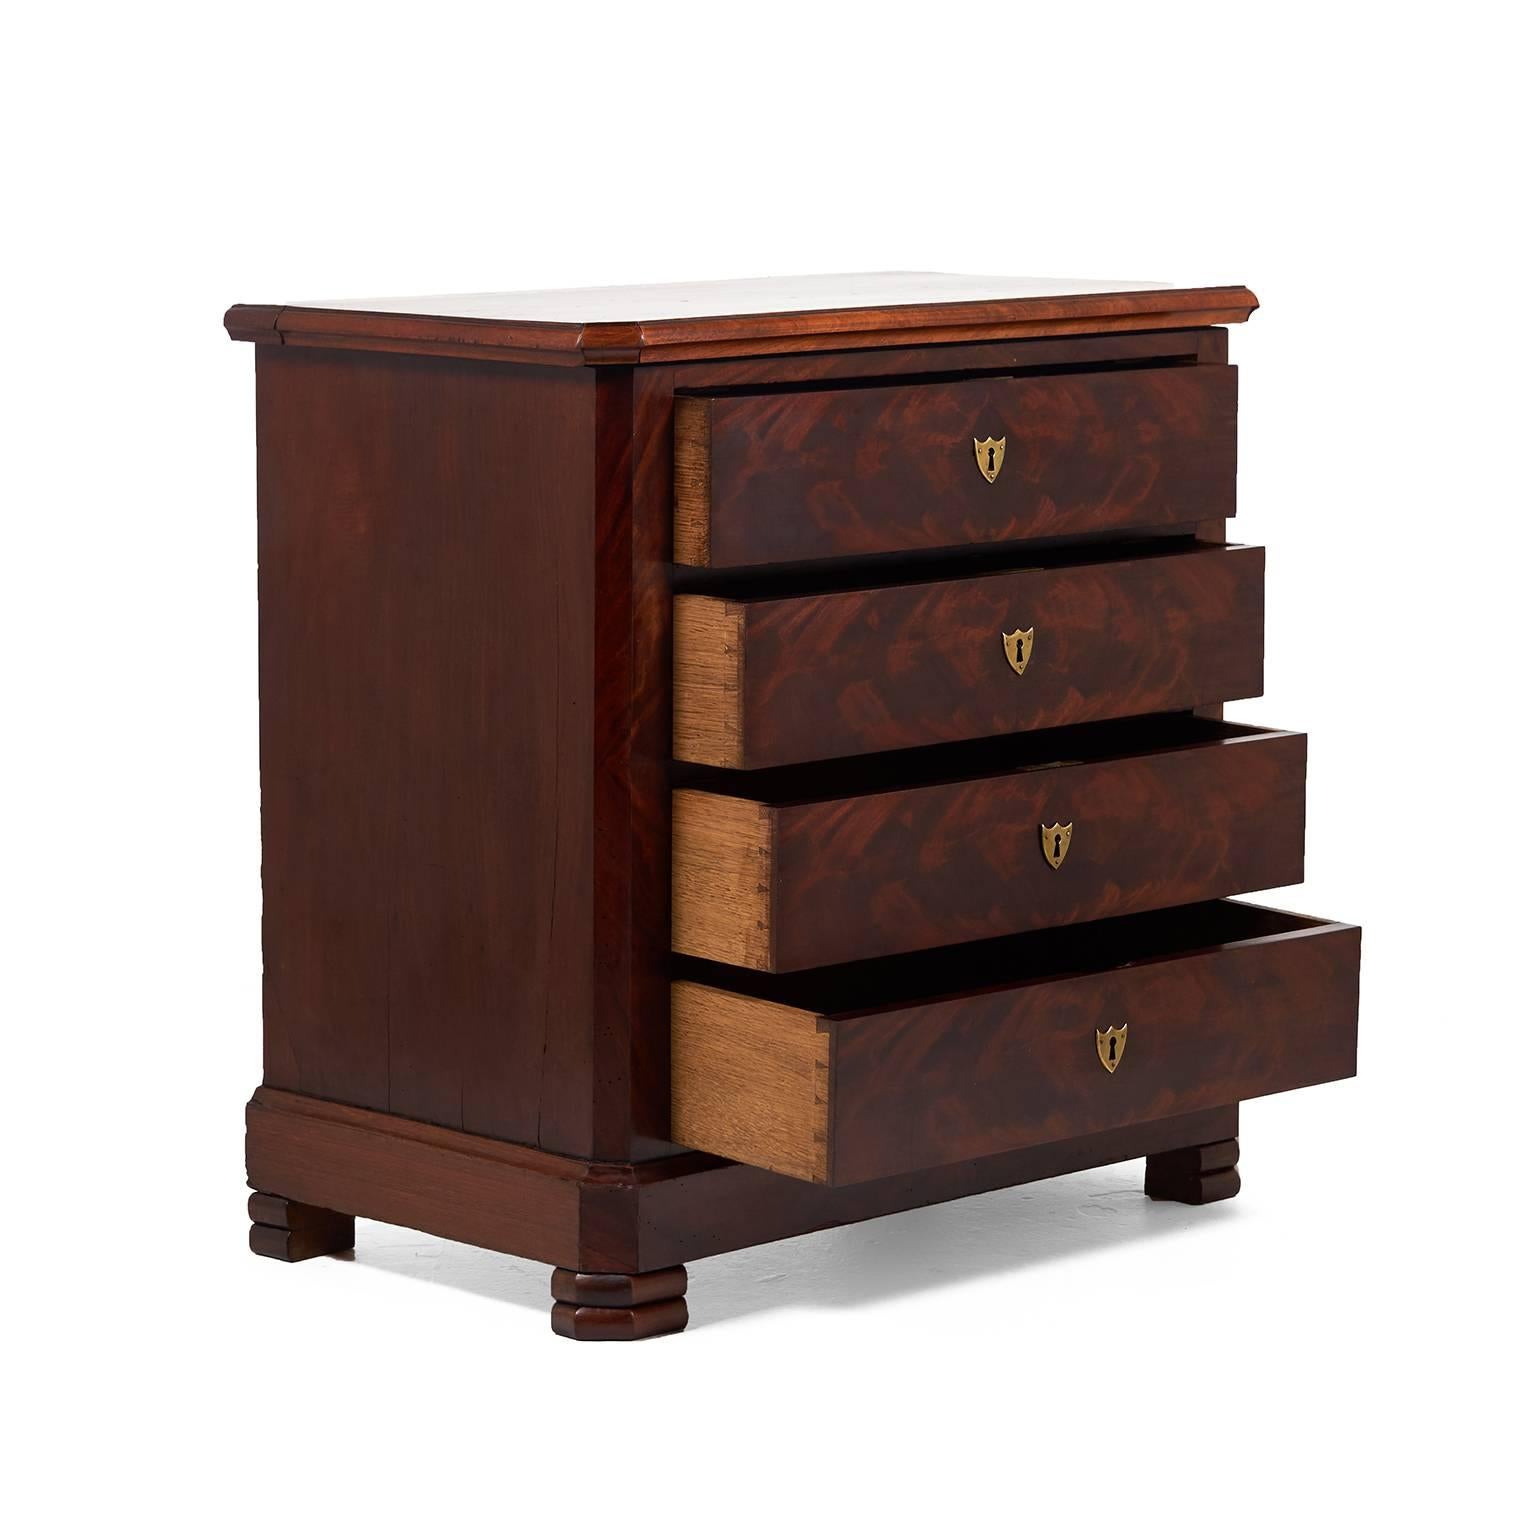 19th Century French Empire Chest